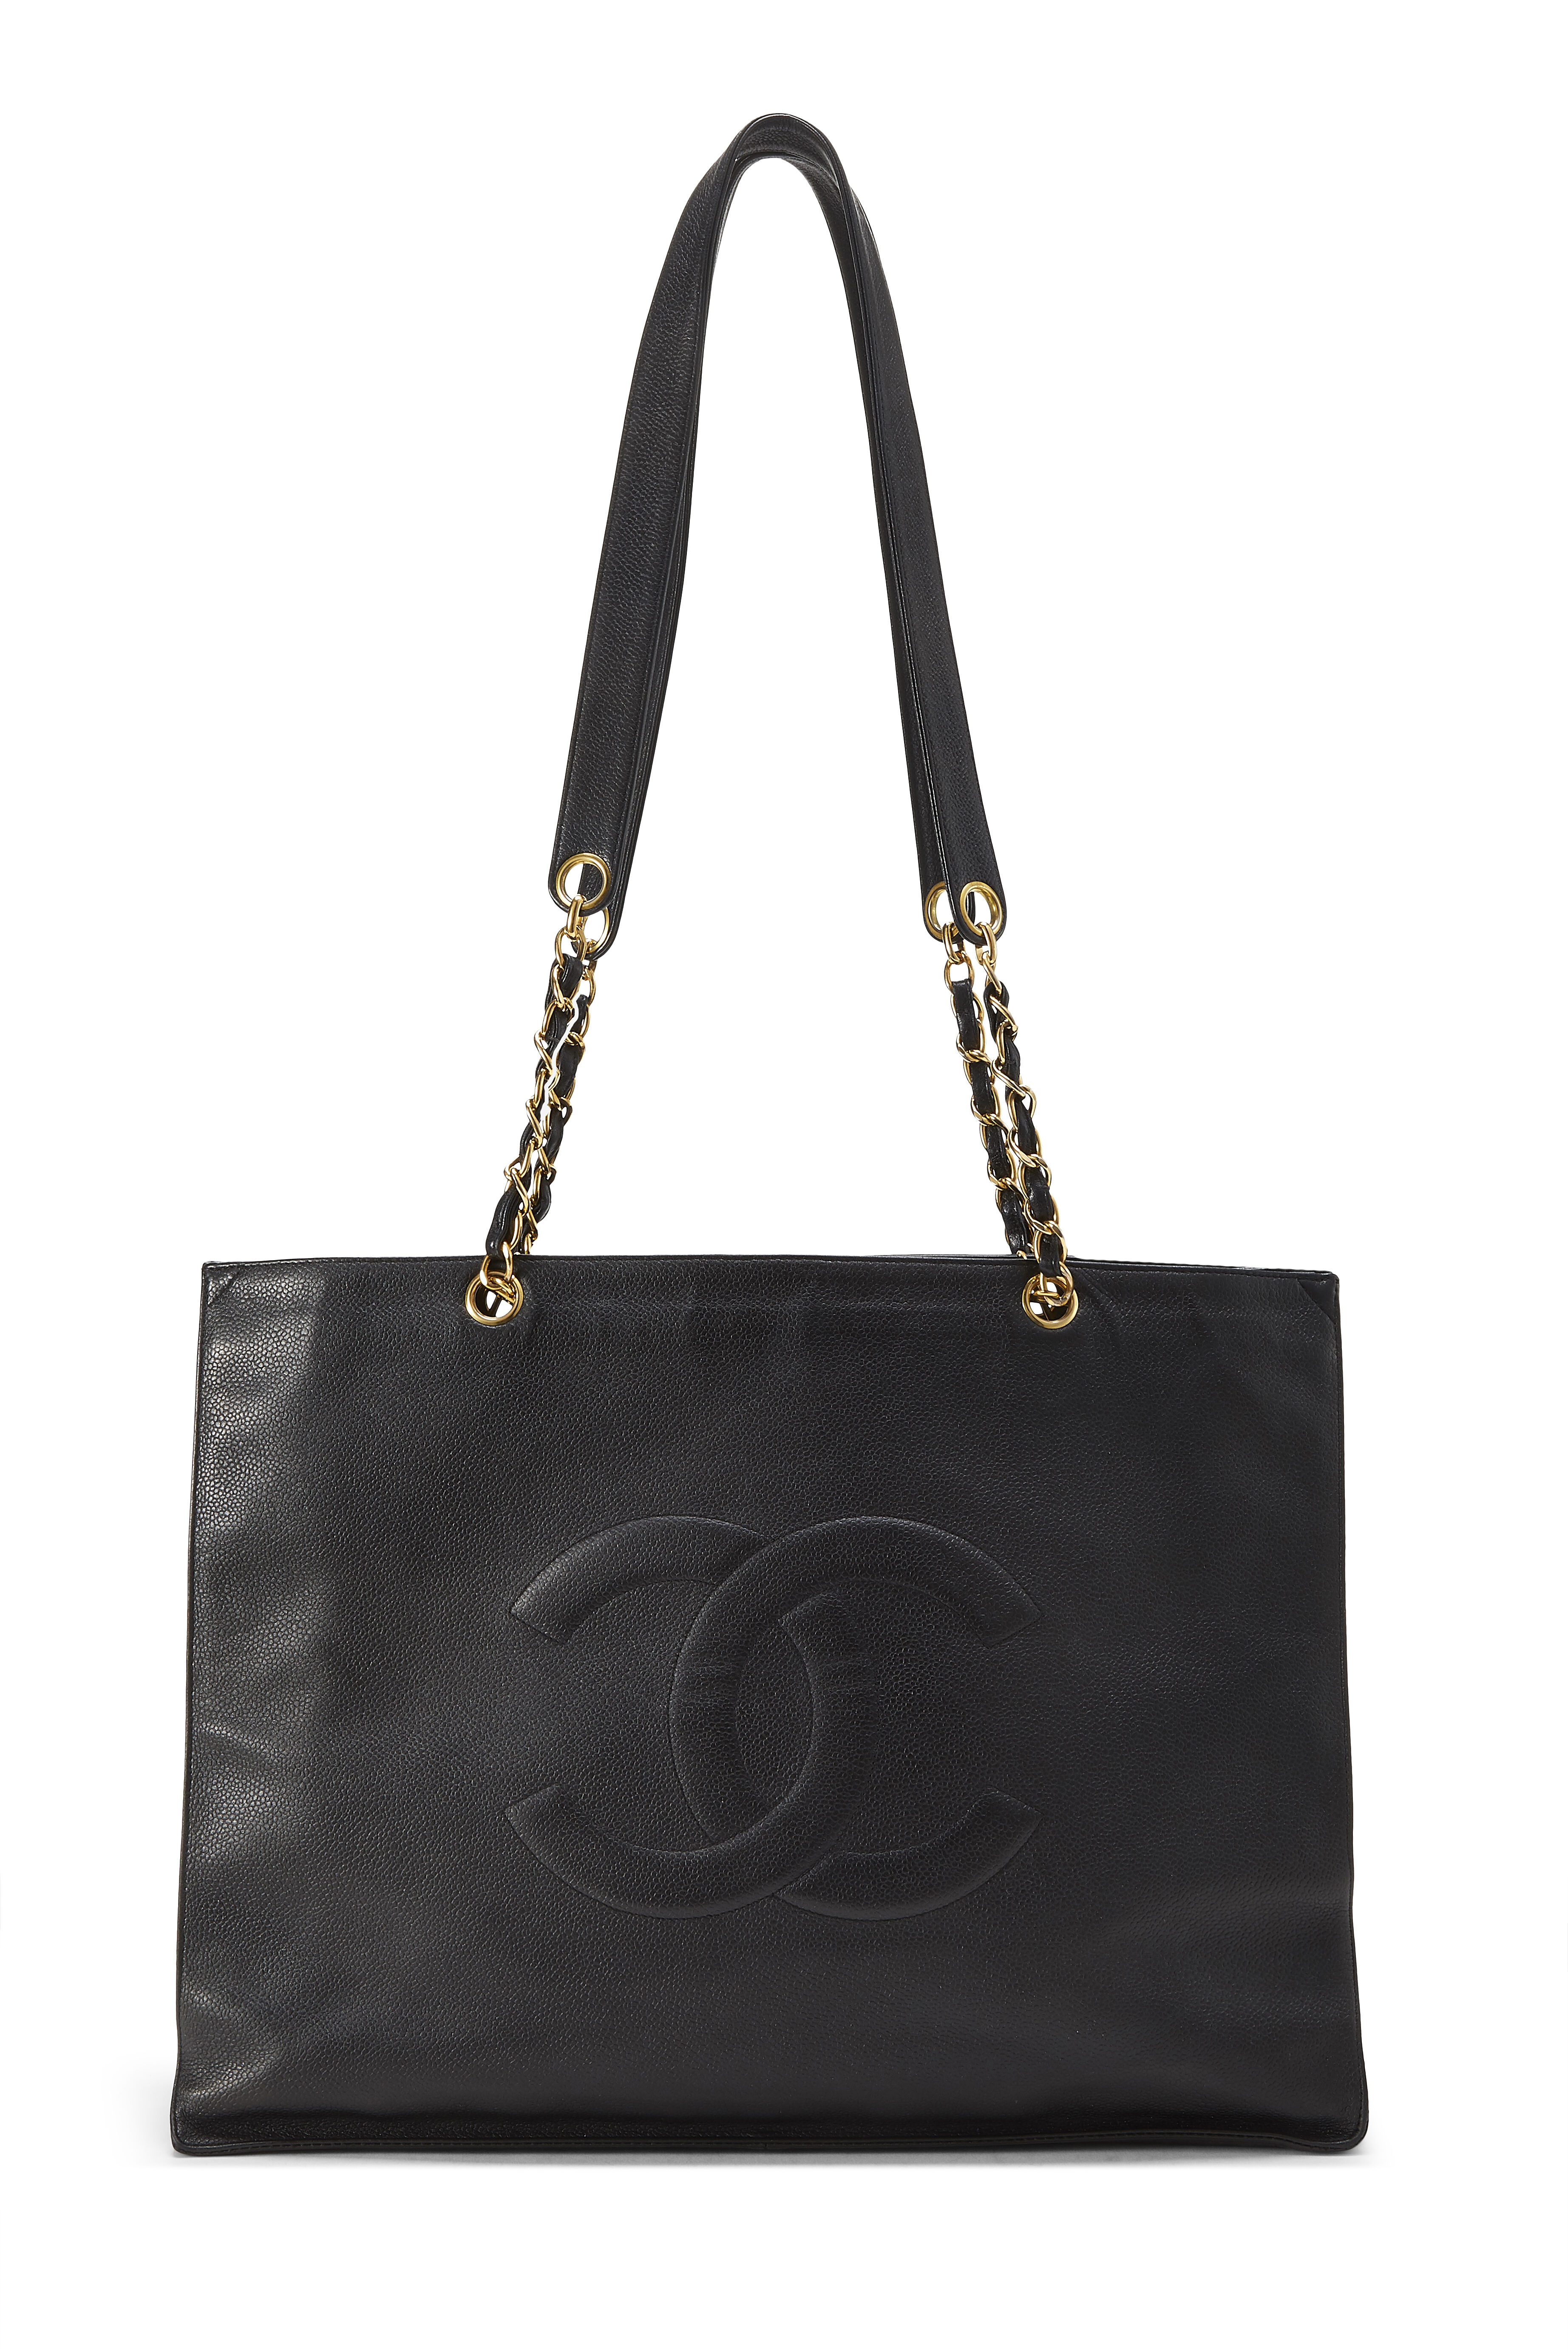 chanel quilted nylon bag black